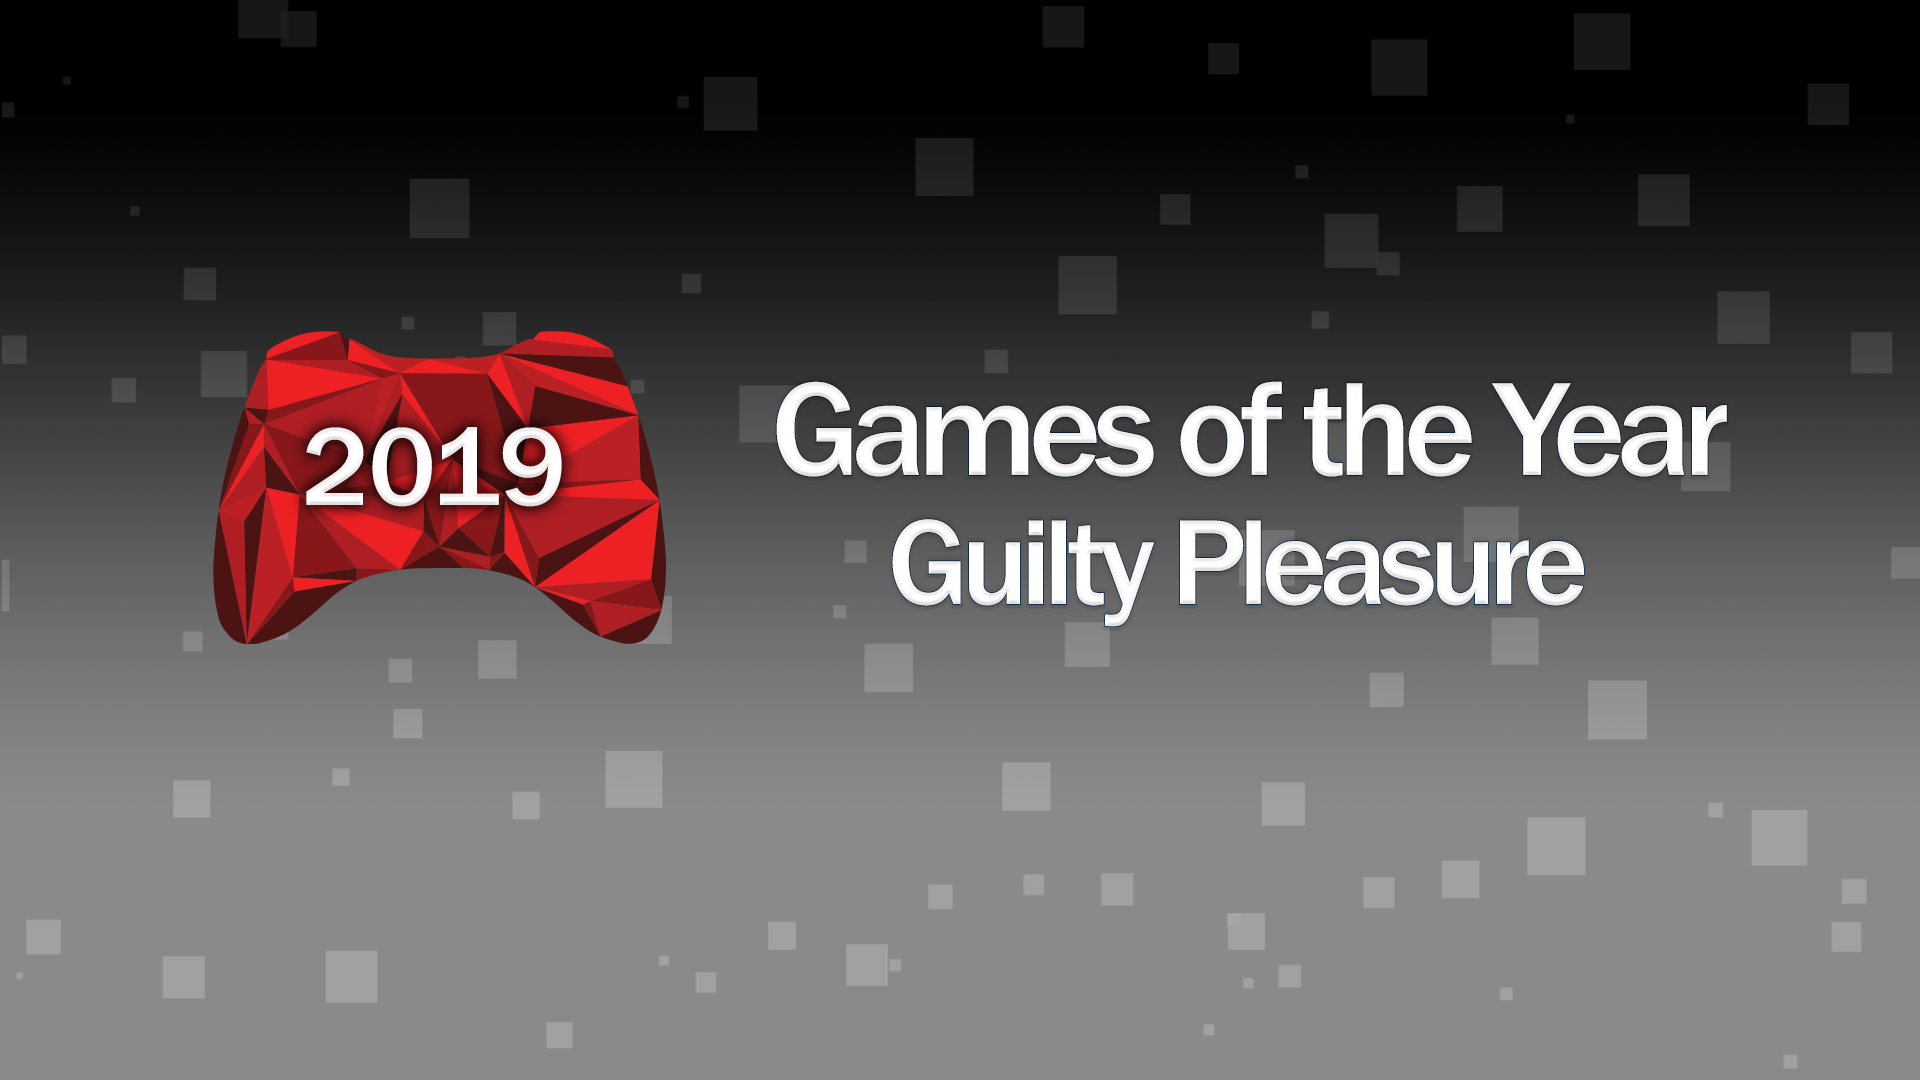 Games of the Year 2019 – Guilty Pleasure